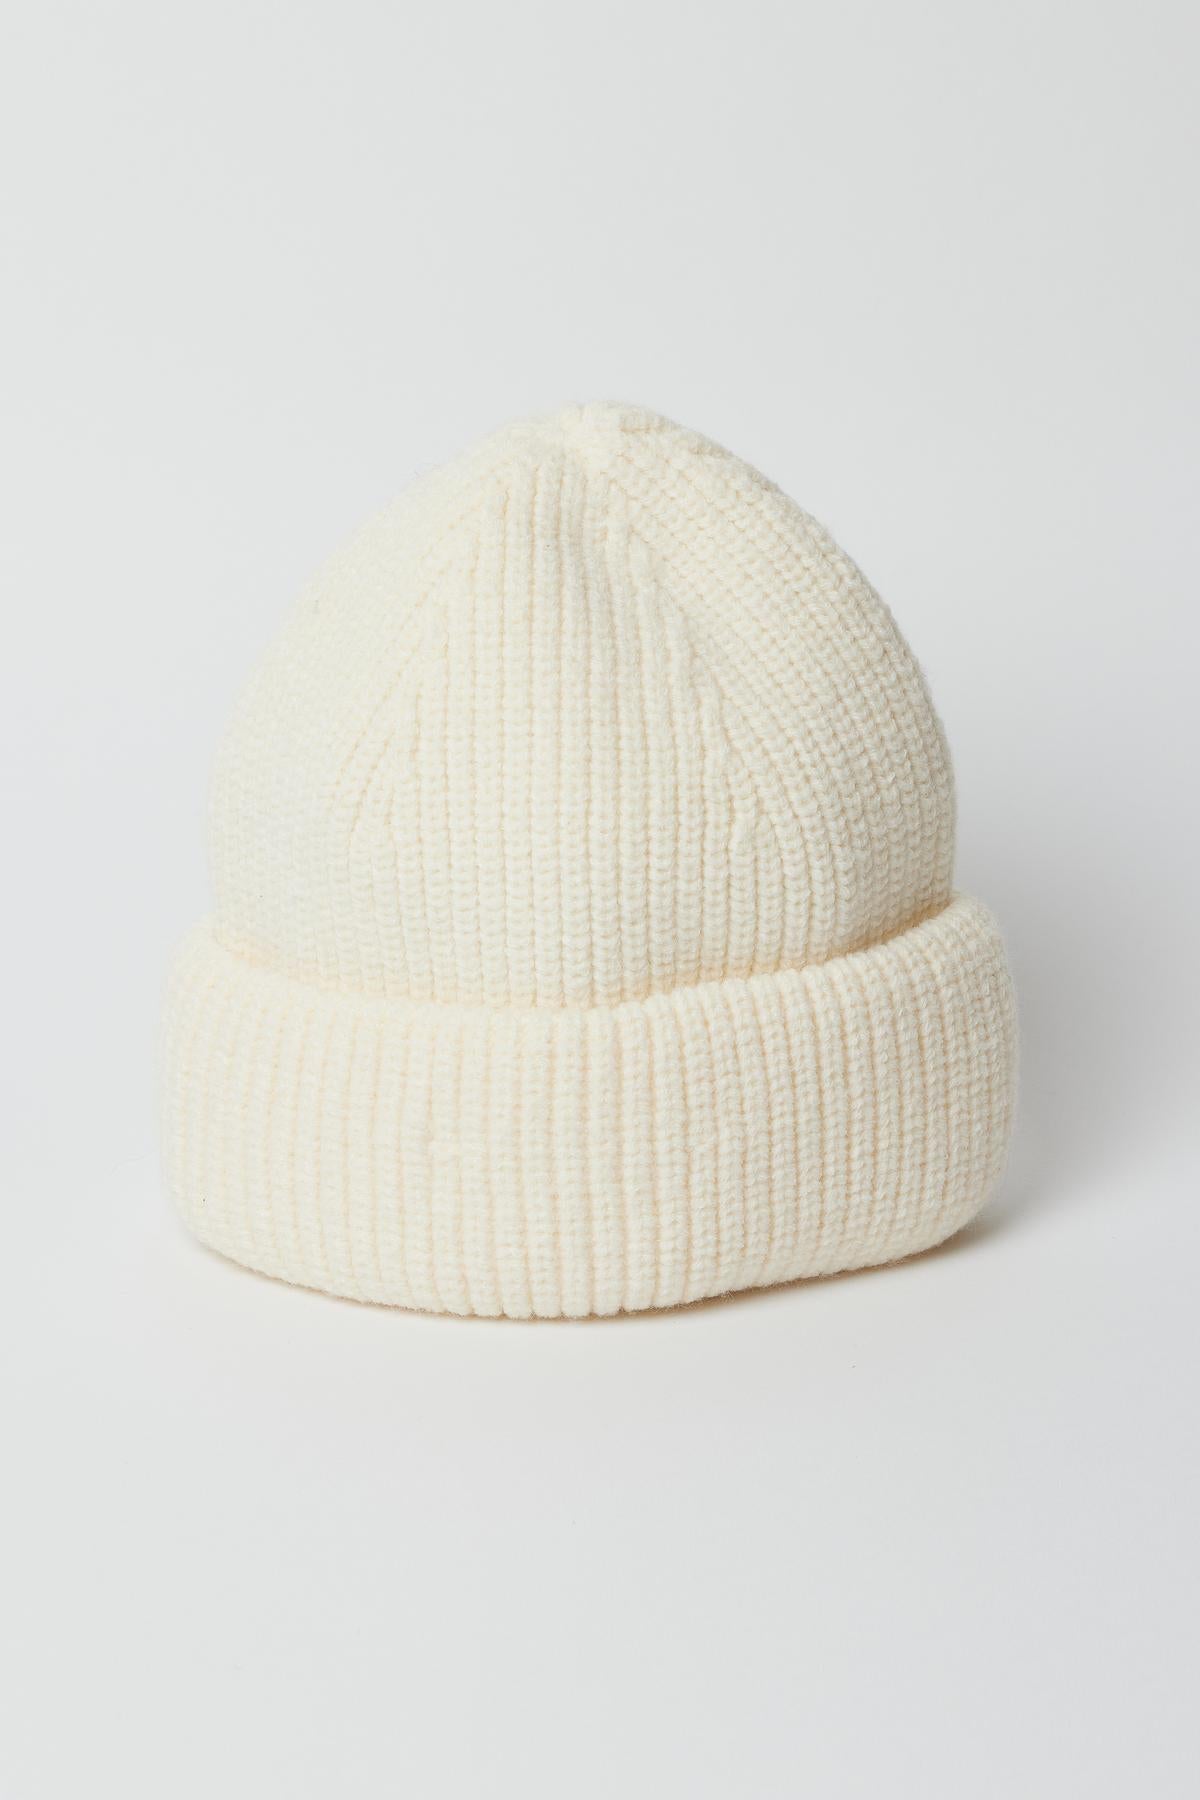 A comfortable MAJOR BEANIE by Velvet by Graham & Spencer on a white background, perfect for winter weather.-35211058413761